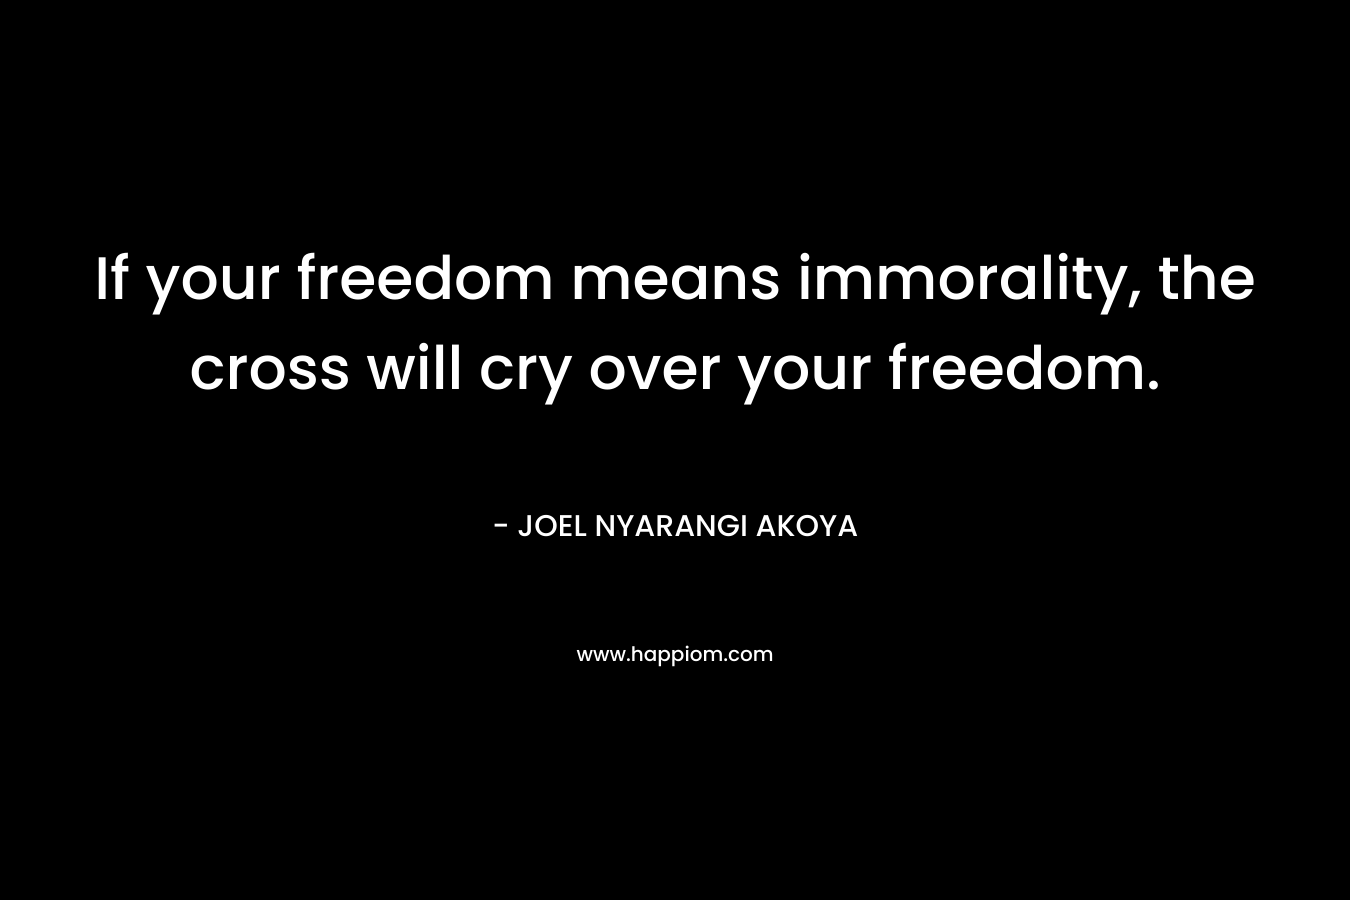 If your freedom means immorality, the cross will cry over your freedom. – JOEL NYARANGI AKOYA